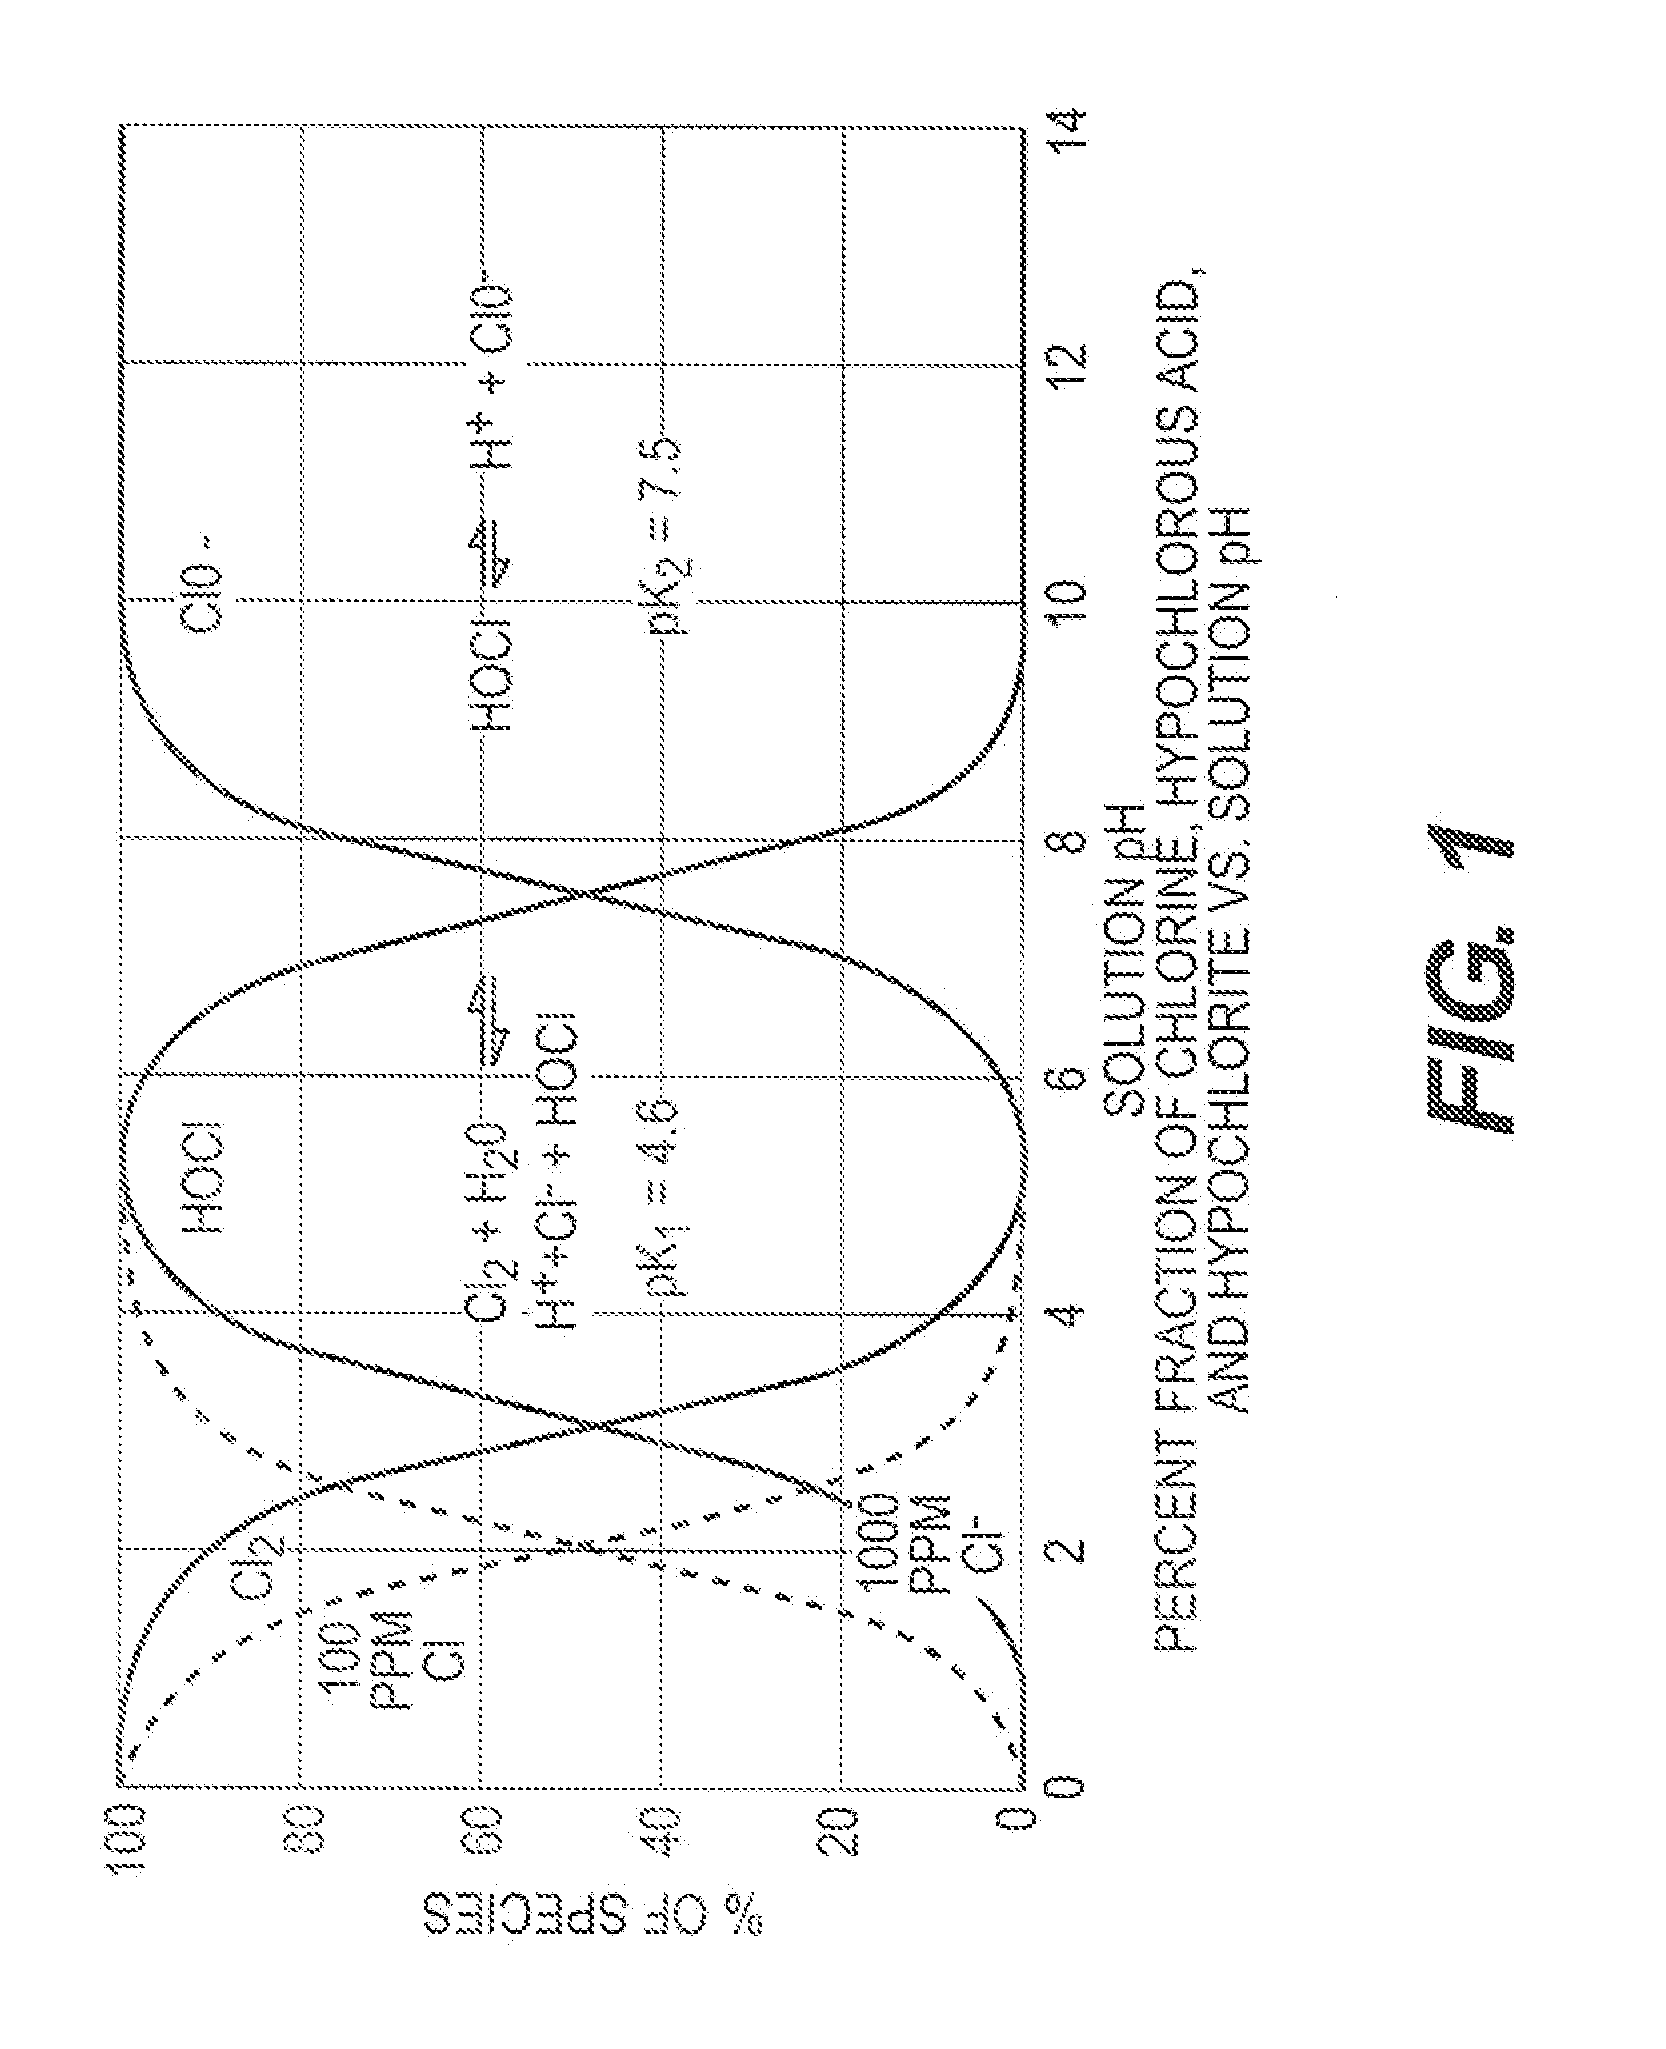 Two stage process for electrochemically generating hypochlorous acid through closed loop, continuous batch processing of brine